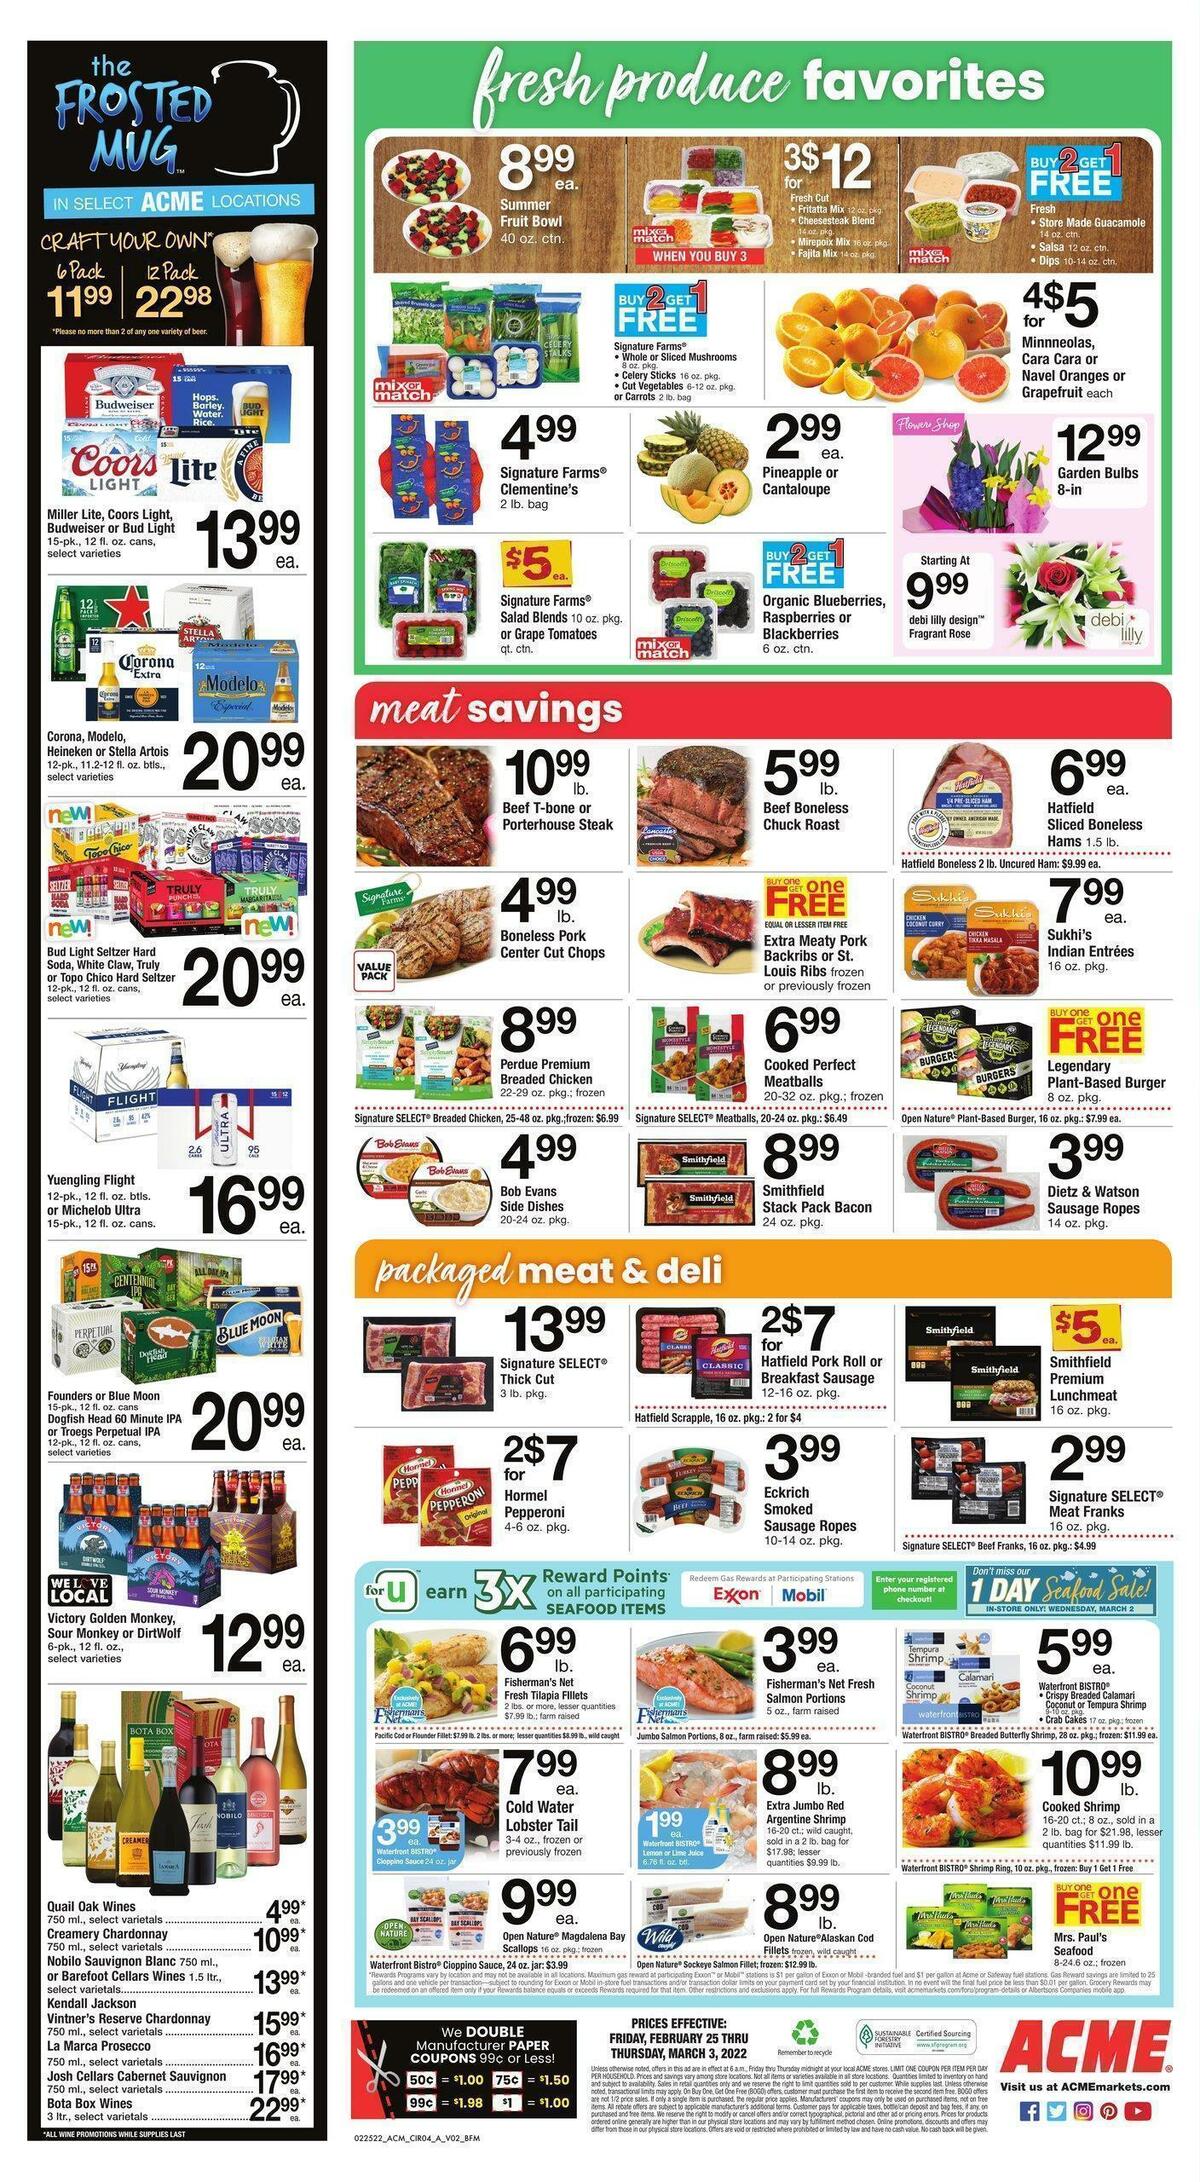 ACME Markets Weekly Ad from February 25